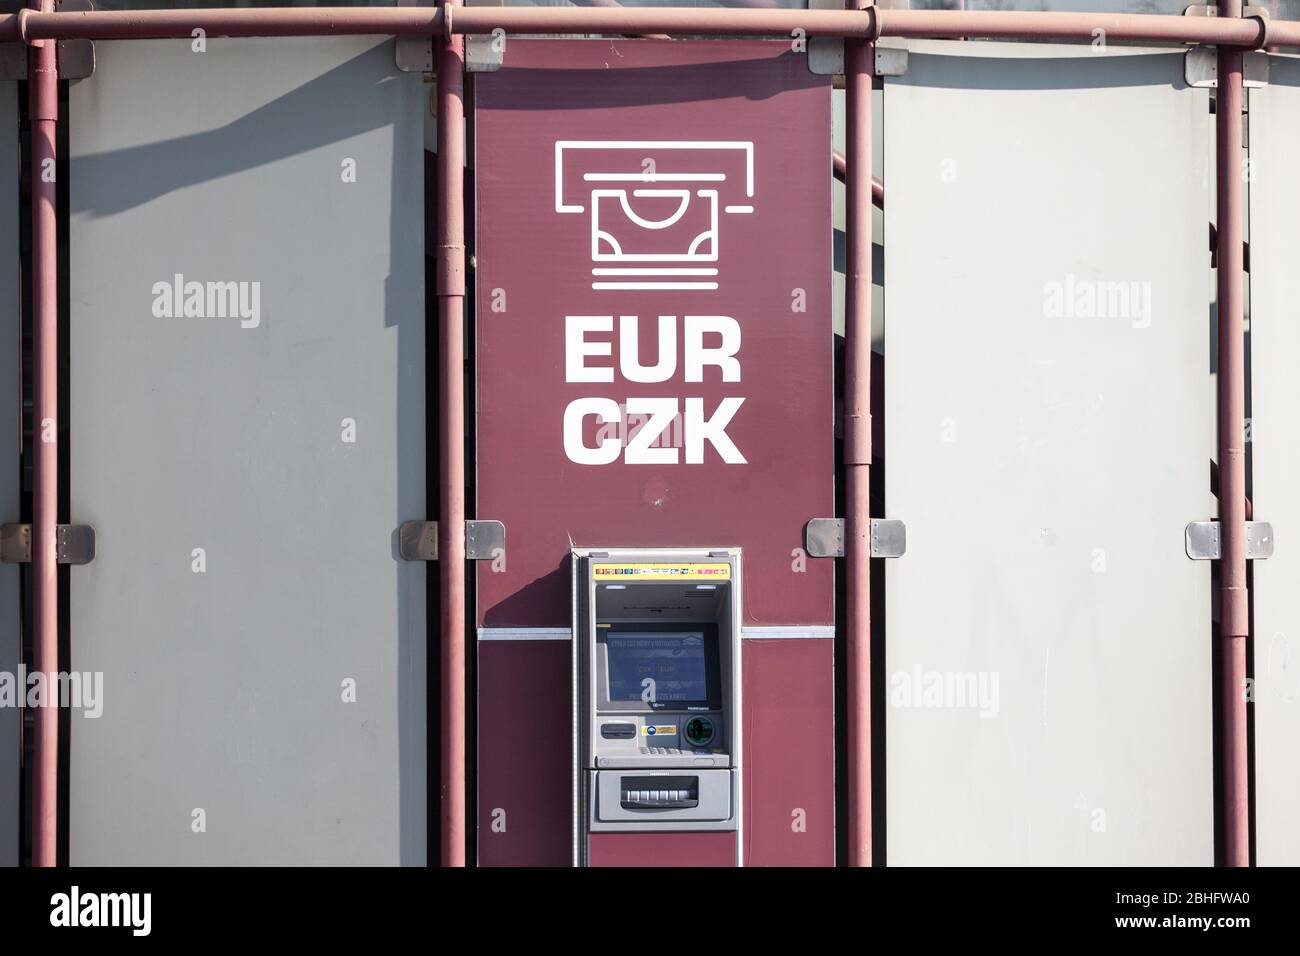 PRAGUE, CZECHIA - OCTOBER 31, 2019: ATM changing & distributing money in Czech currency, the Czech Crown, CZK, and European currency, the Euro, EUR, d Stock Photo